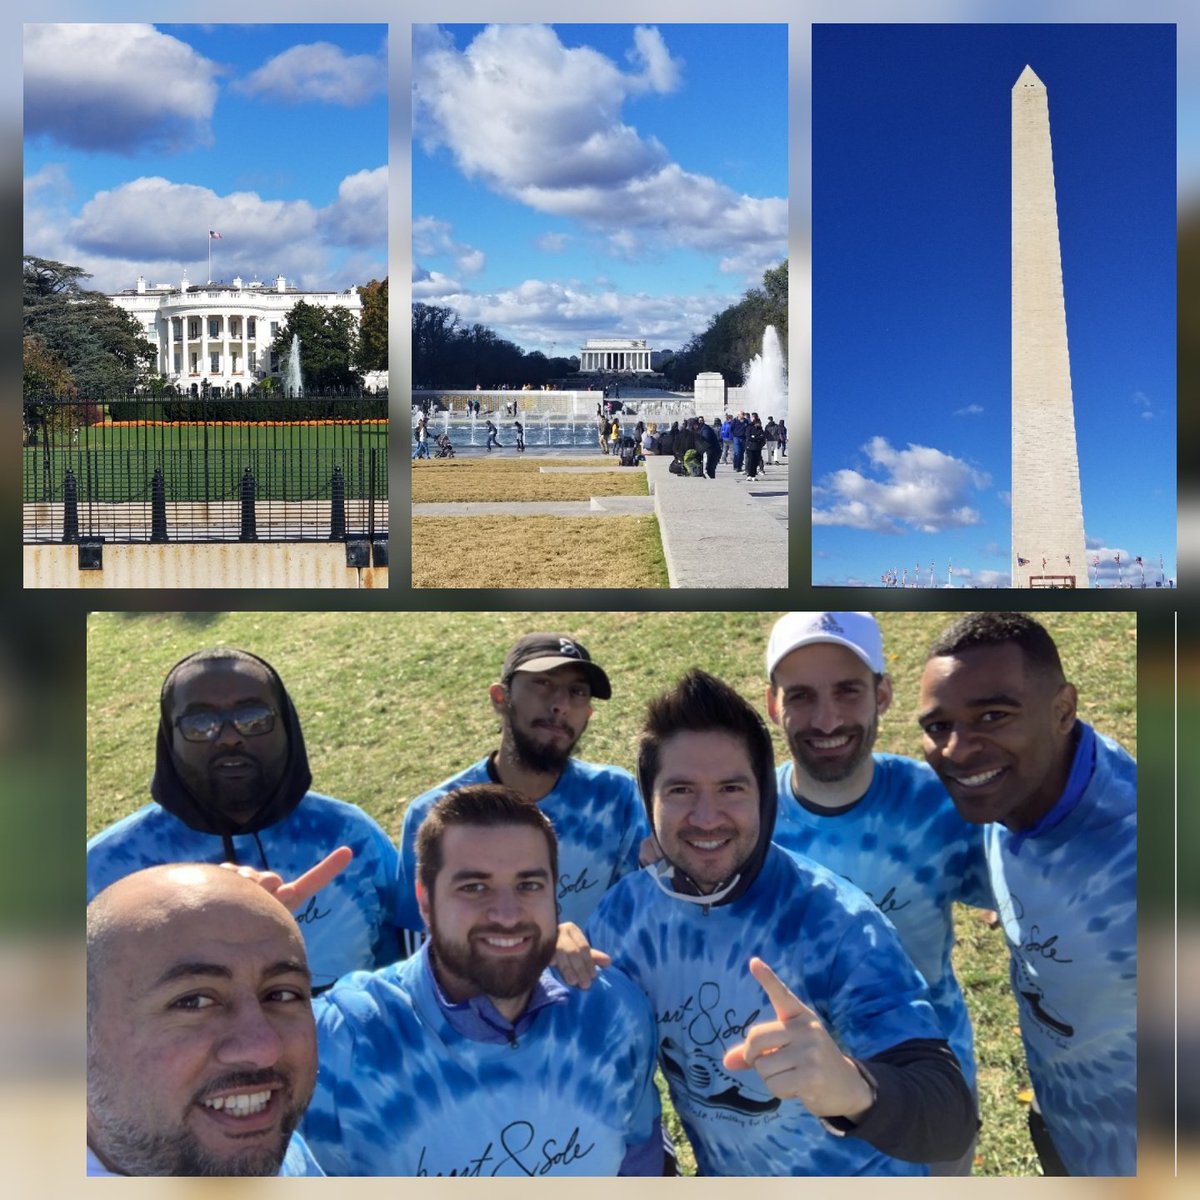 Walking the city and seeing the sites in DC. Thanks for having us @HeartOfGWR #DCHeartWalk #ATT